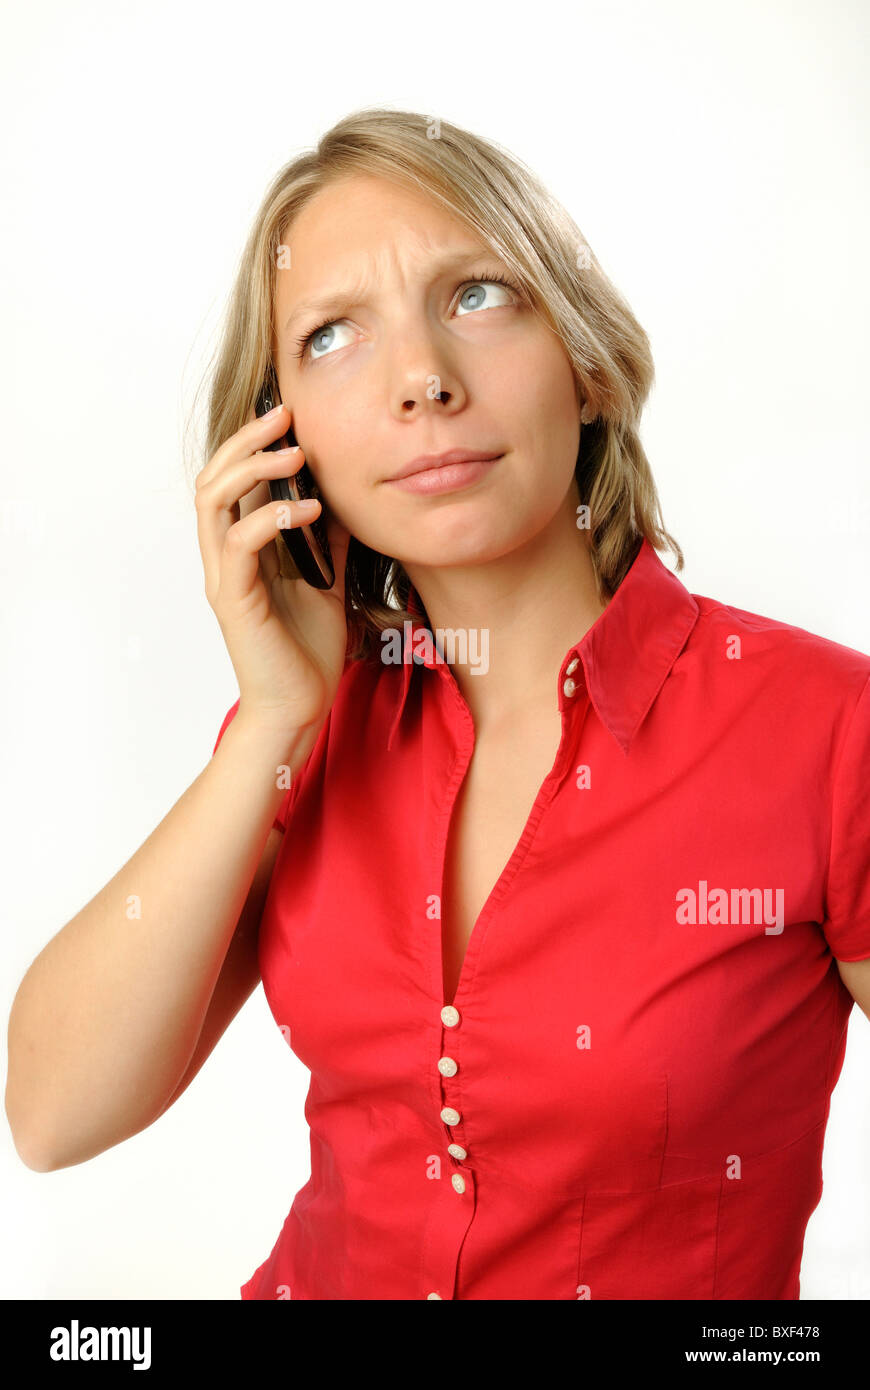 Young woman in a red blouse making a call on a mobile phone, sceptical expression. Stock Photo